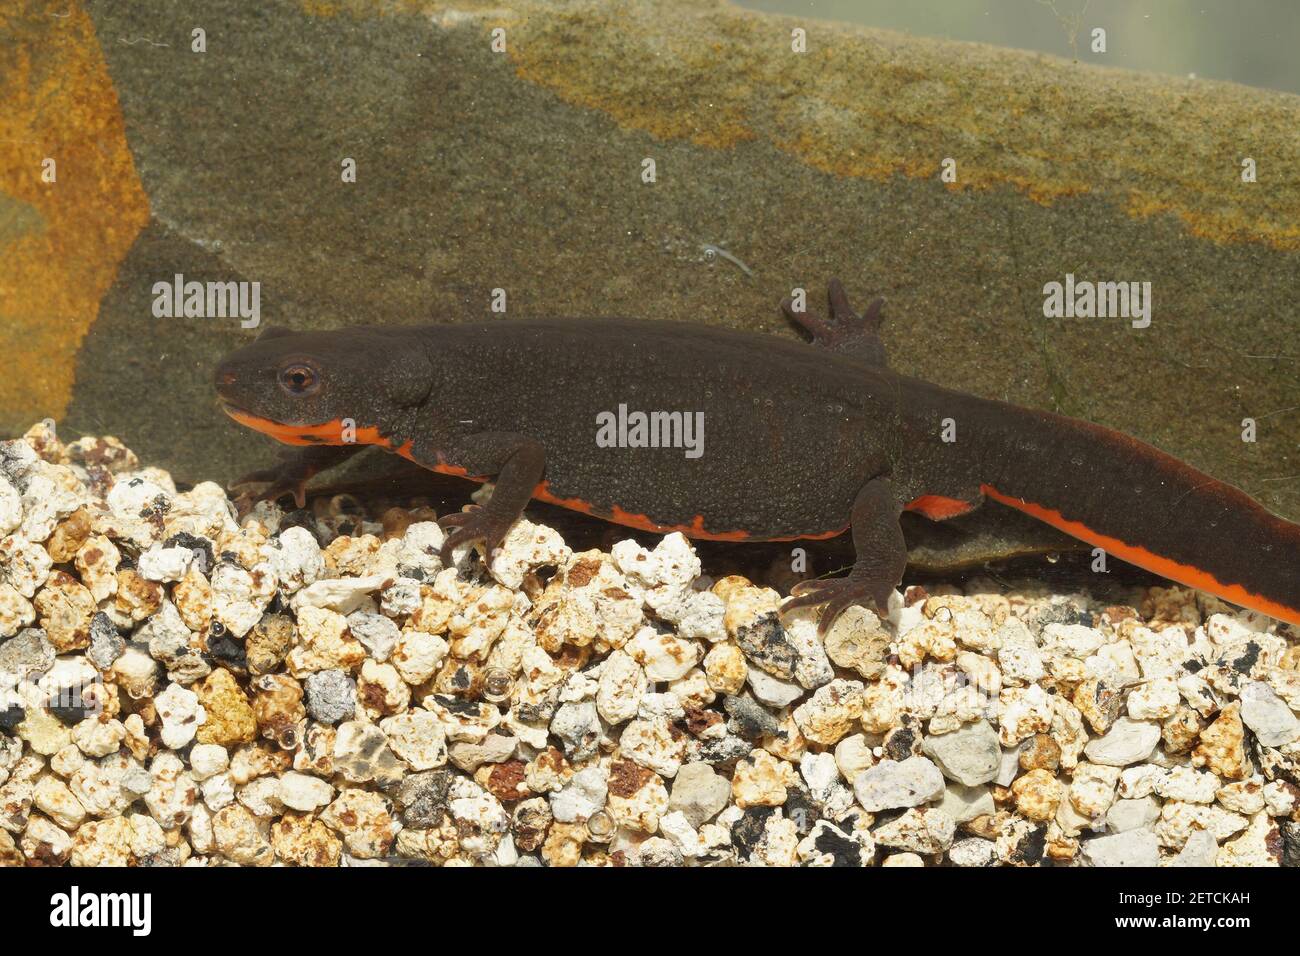 A closeup shot of an aquatic female of the Chinese fire-bellied newt, Cynops Orientalis Stock Photo